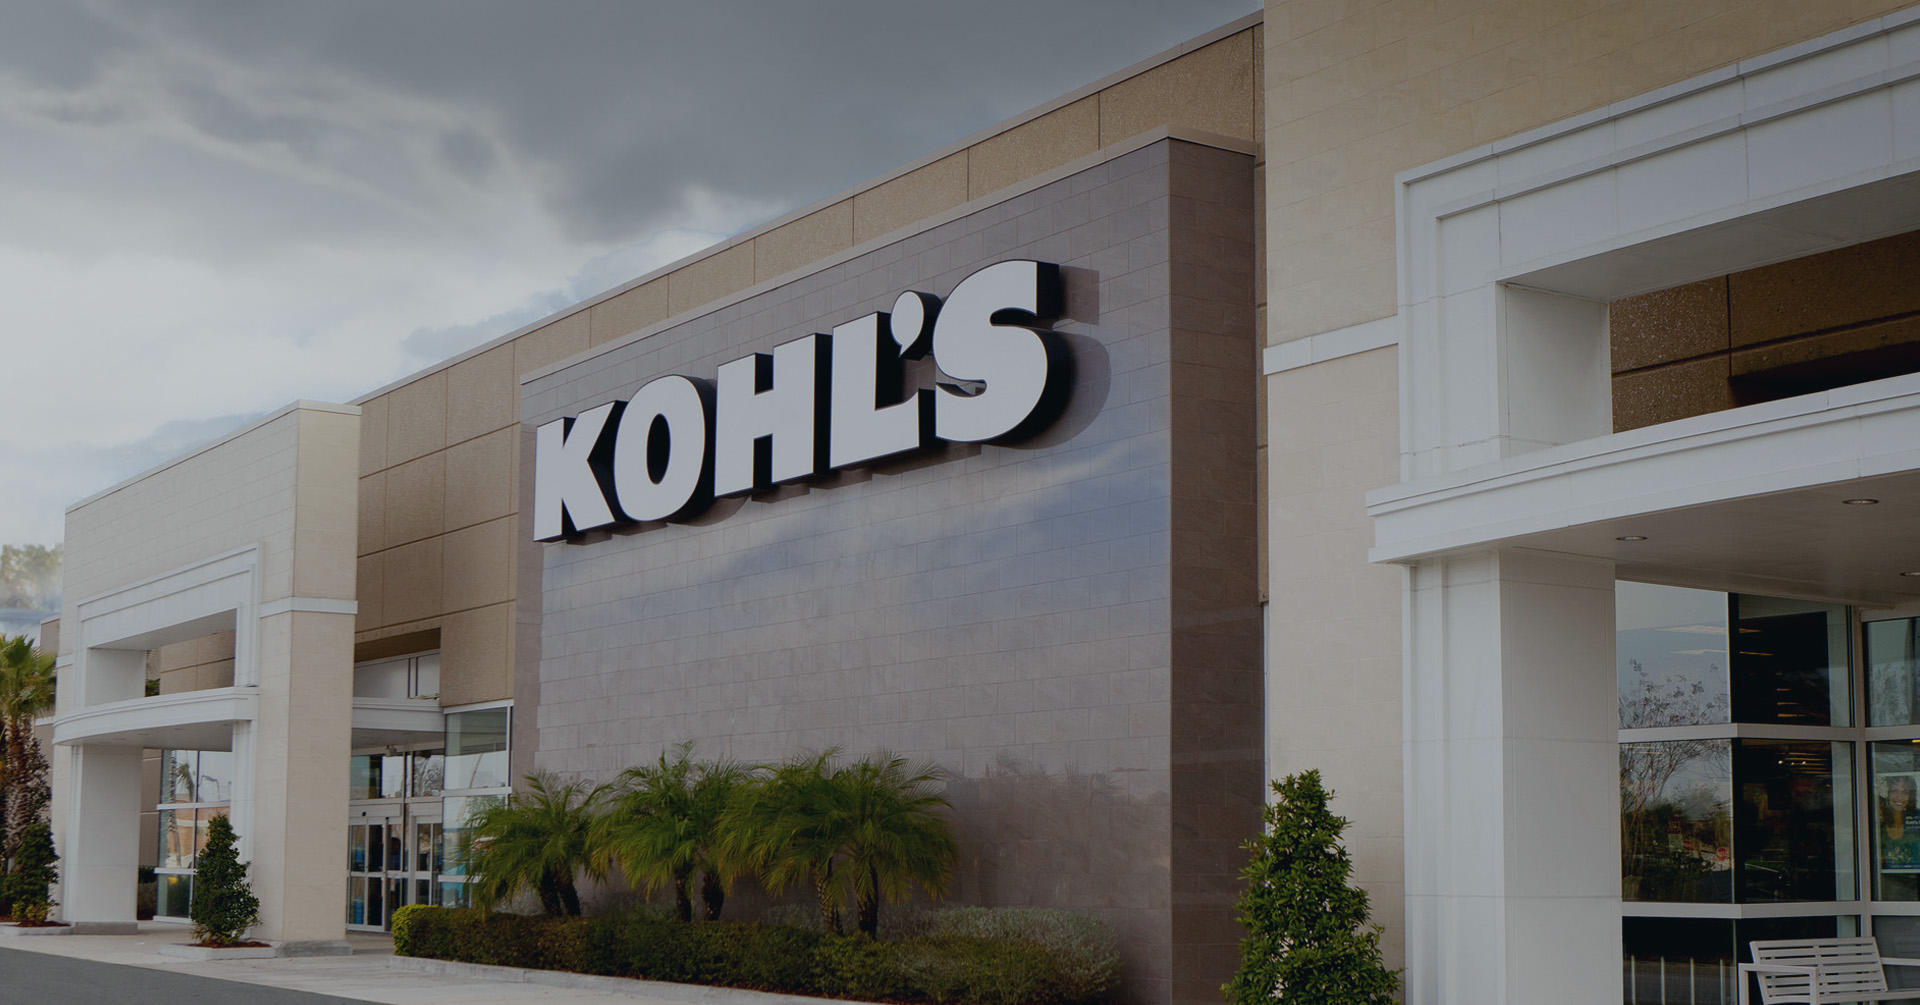 The Anniversary of Hurricane Ian: Kohl’s Reflects on Their Response